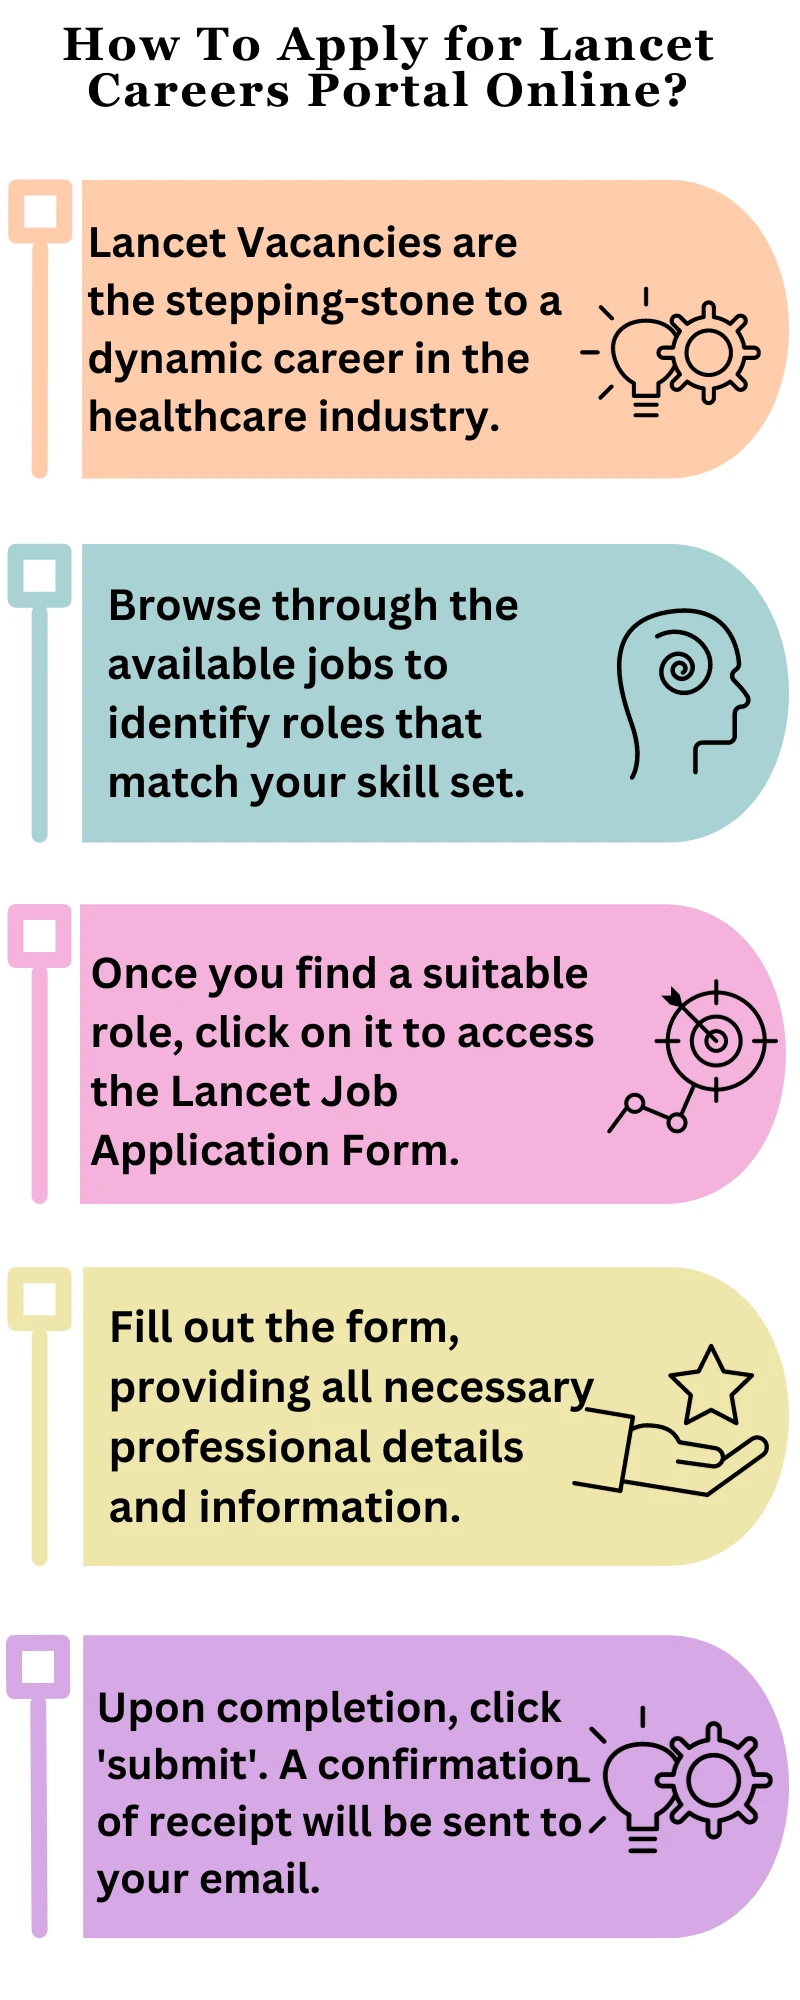 How To Apply for Lancet Careers Portal Online 